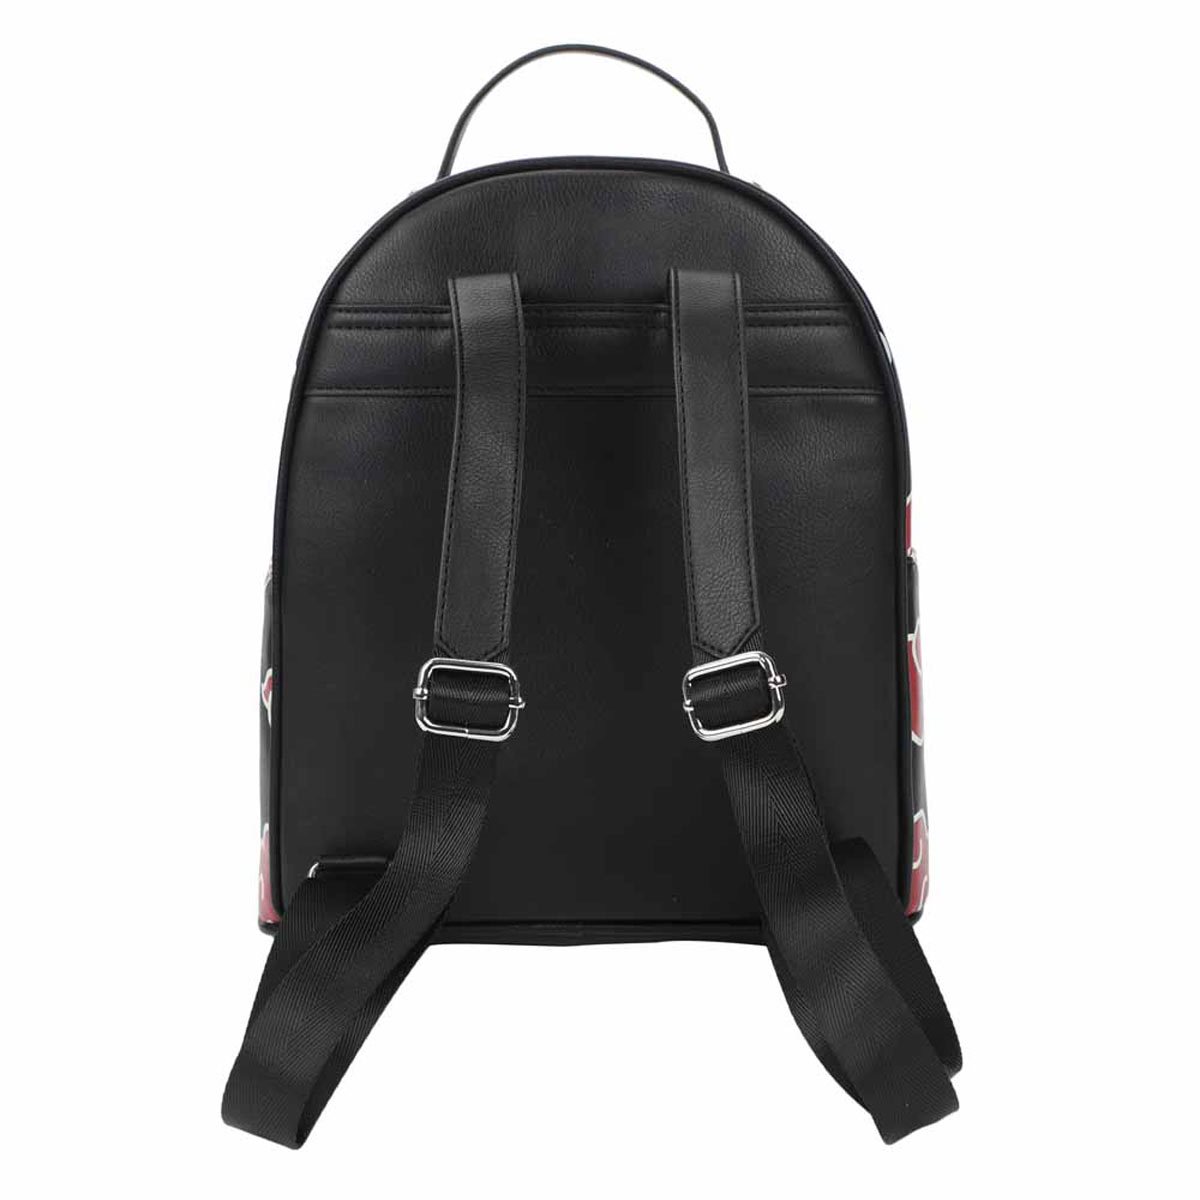 Mini Backpack for Women, Fashion Convertible Soft PU Leather Small Backpack  Purse with Detachable Strap for Women, Teen Girls-Black - Walmart.com